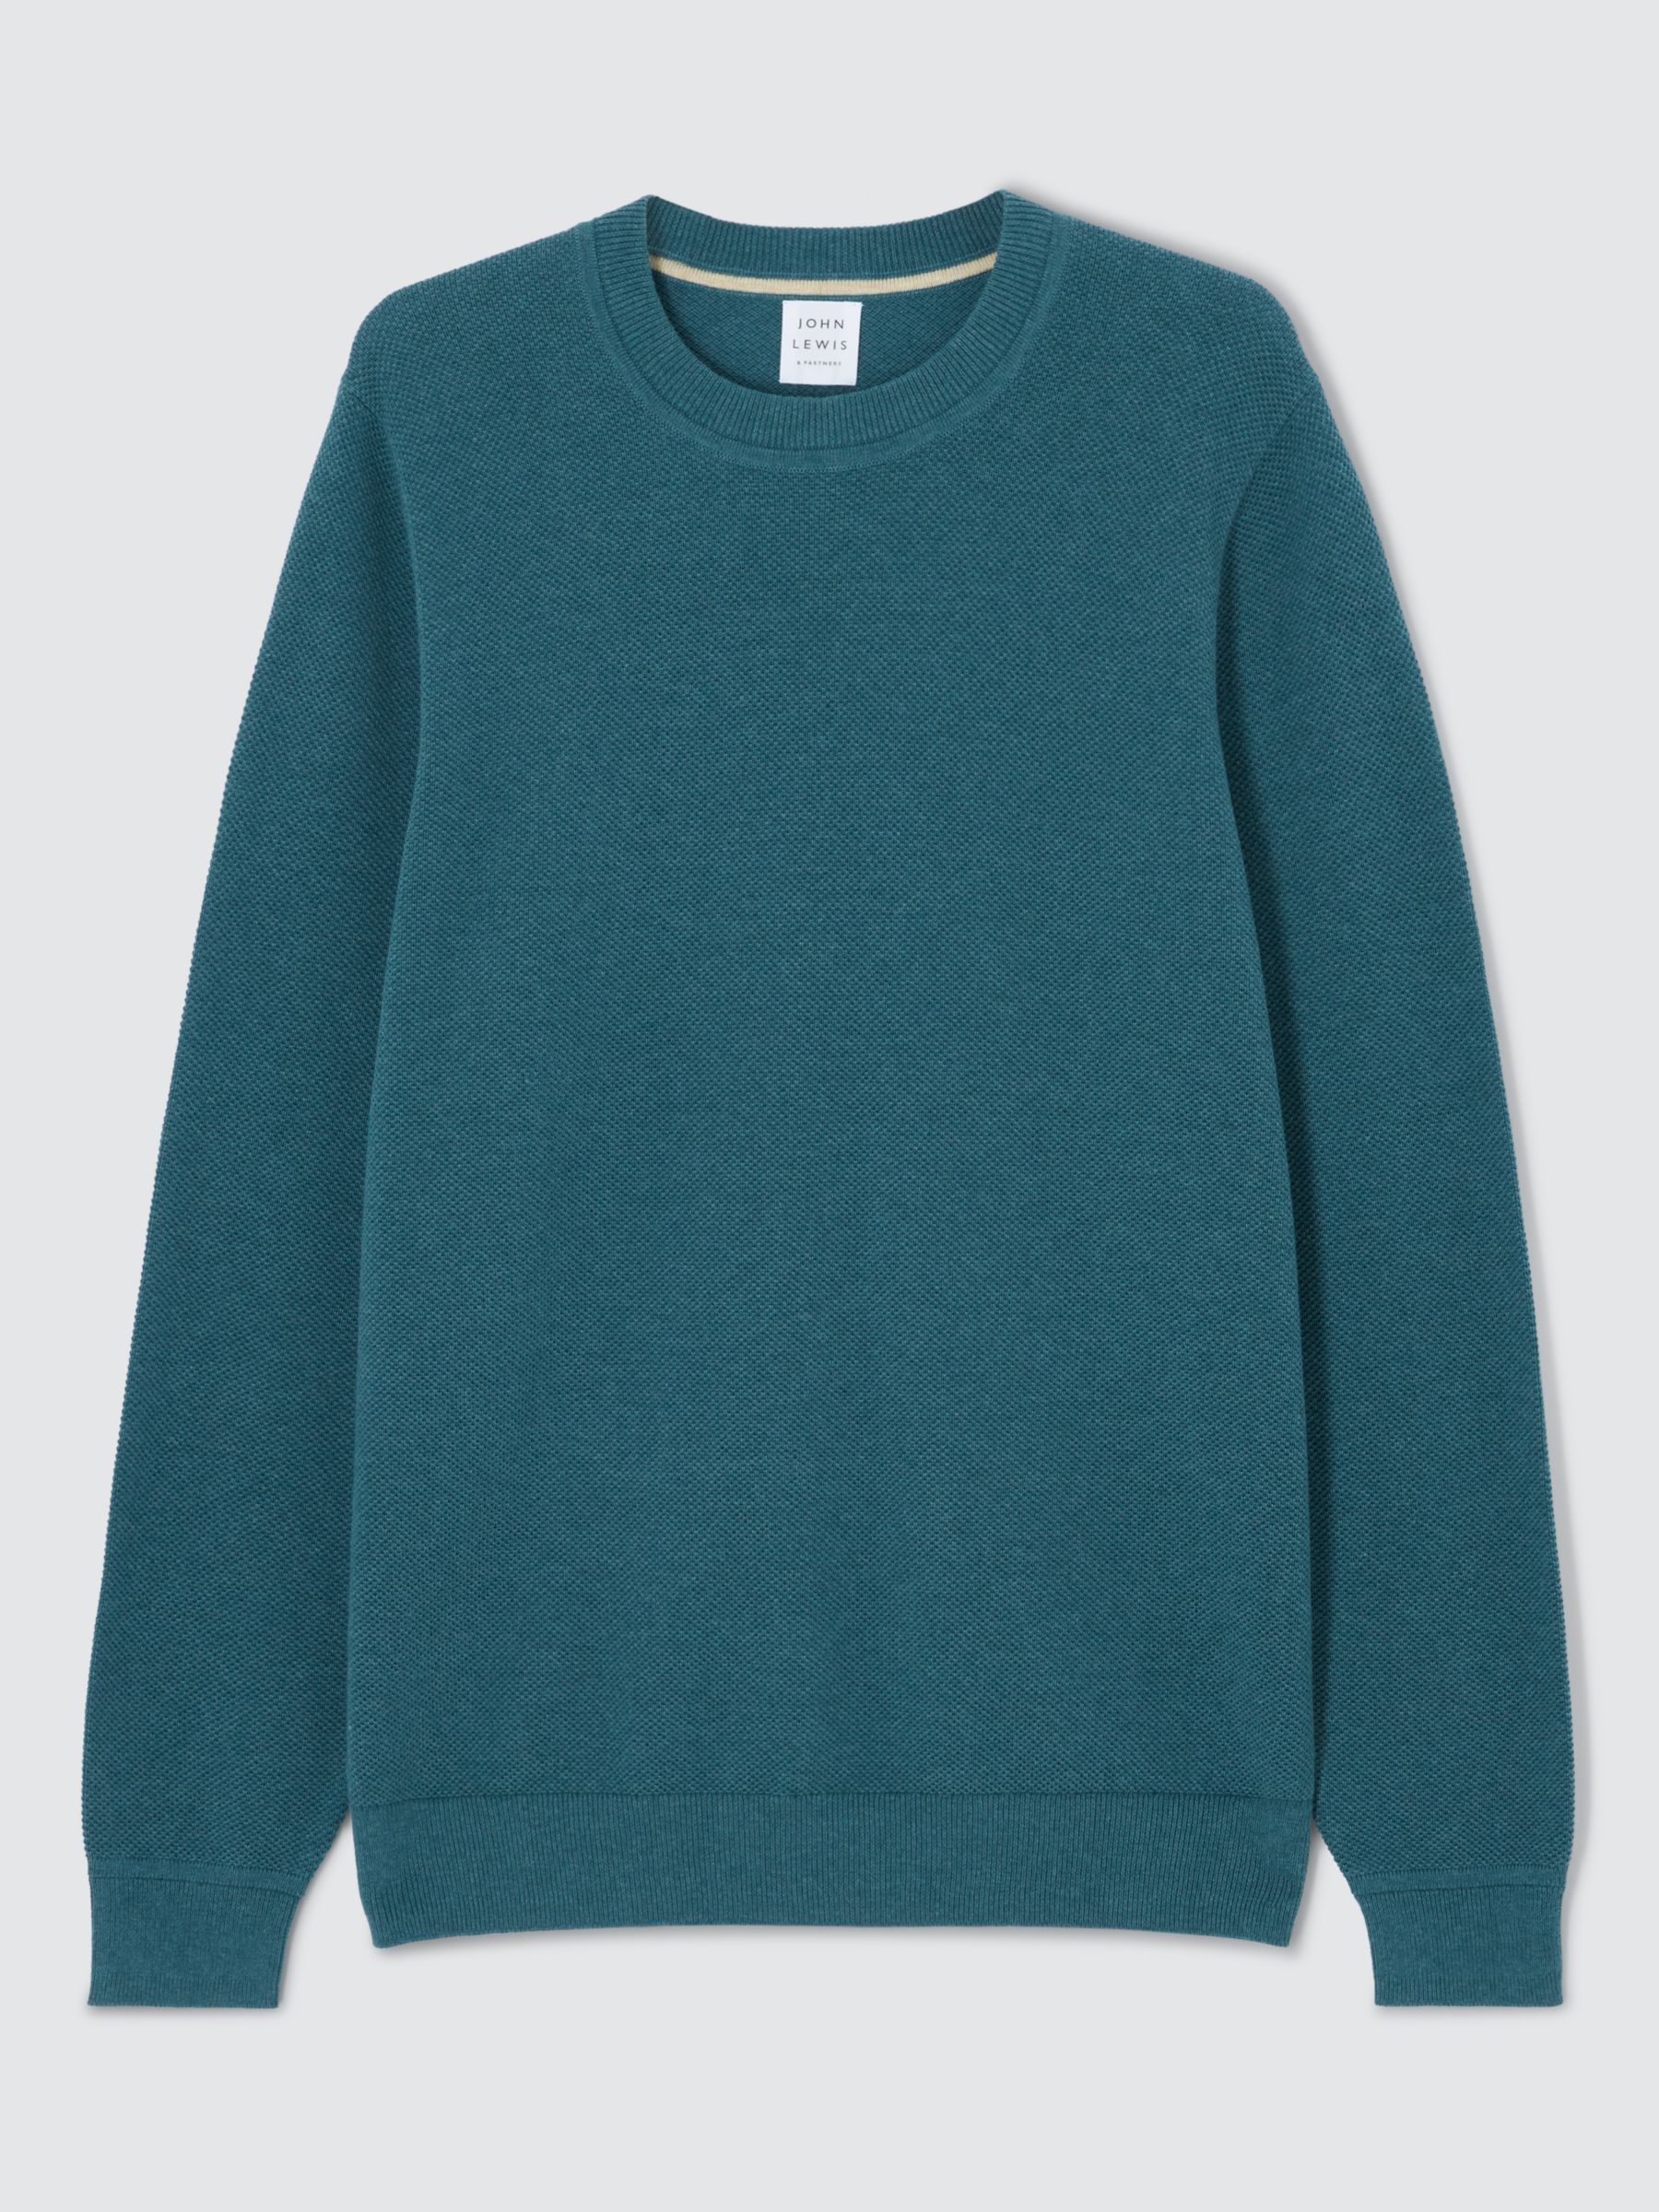 John Lewis Cotton Knitted Jumper, Blue Teal, S